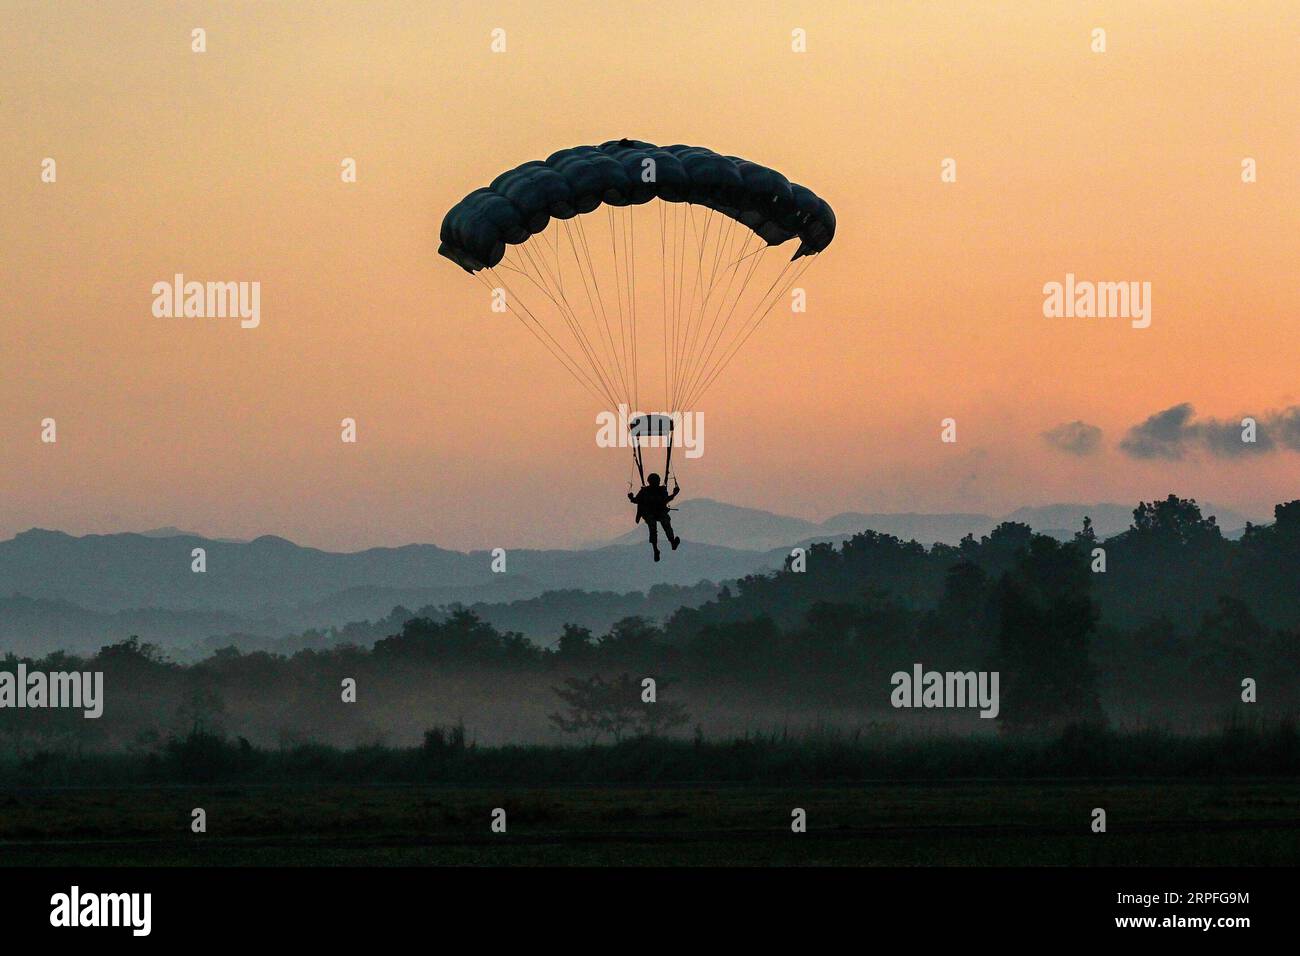 190924 -- NUEVA ECIJA PROVINCE, Sept. 24, 2019 -- A soldier from the Armed Forces of the Philippines AFP uses a parachute during the DAGIT-PA sea, air, land military exercise inside Fort Magsaysay in Nueva Ecija province, the Philippines, Sept. 23, 2019. The AFP held a combined military exercise to improve the inter-operability between the main service branches: the Army, the Navy and the Air Force.  THE PHILIPPINES-NUEVA ECIJA-AFP-MILITARY EXERCISE ROUELLExUMALI PUBLICATIONxNOTxINxCHN Stock Photo